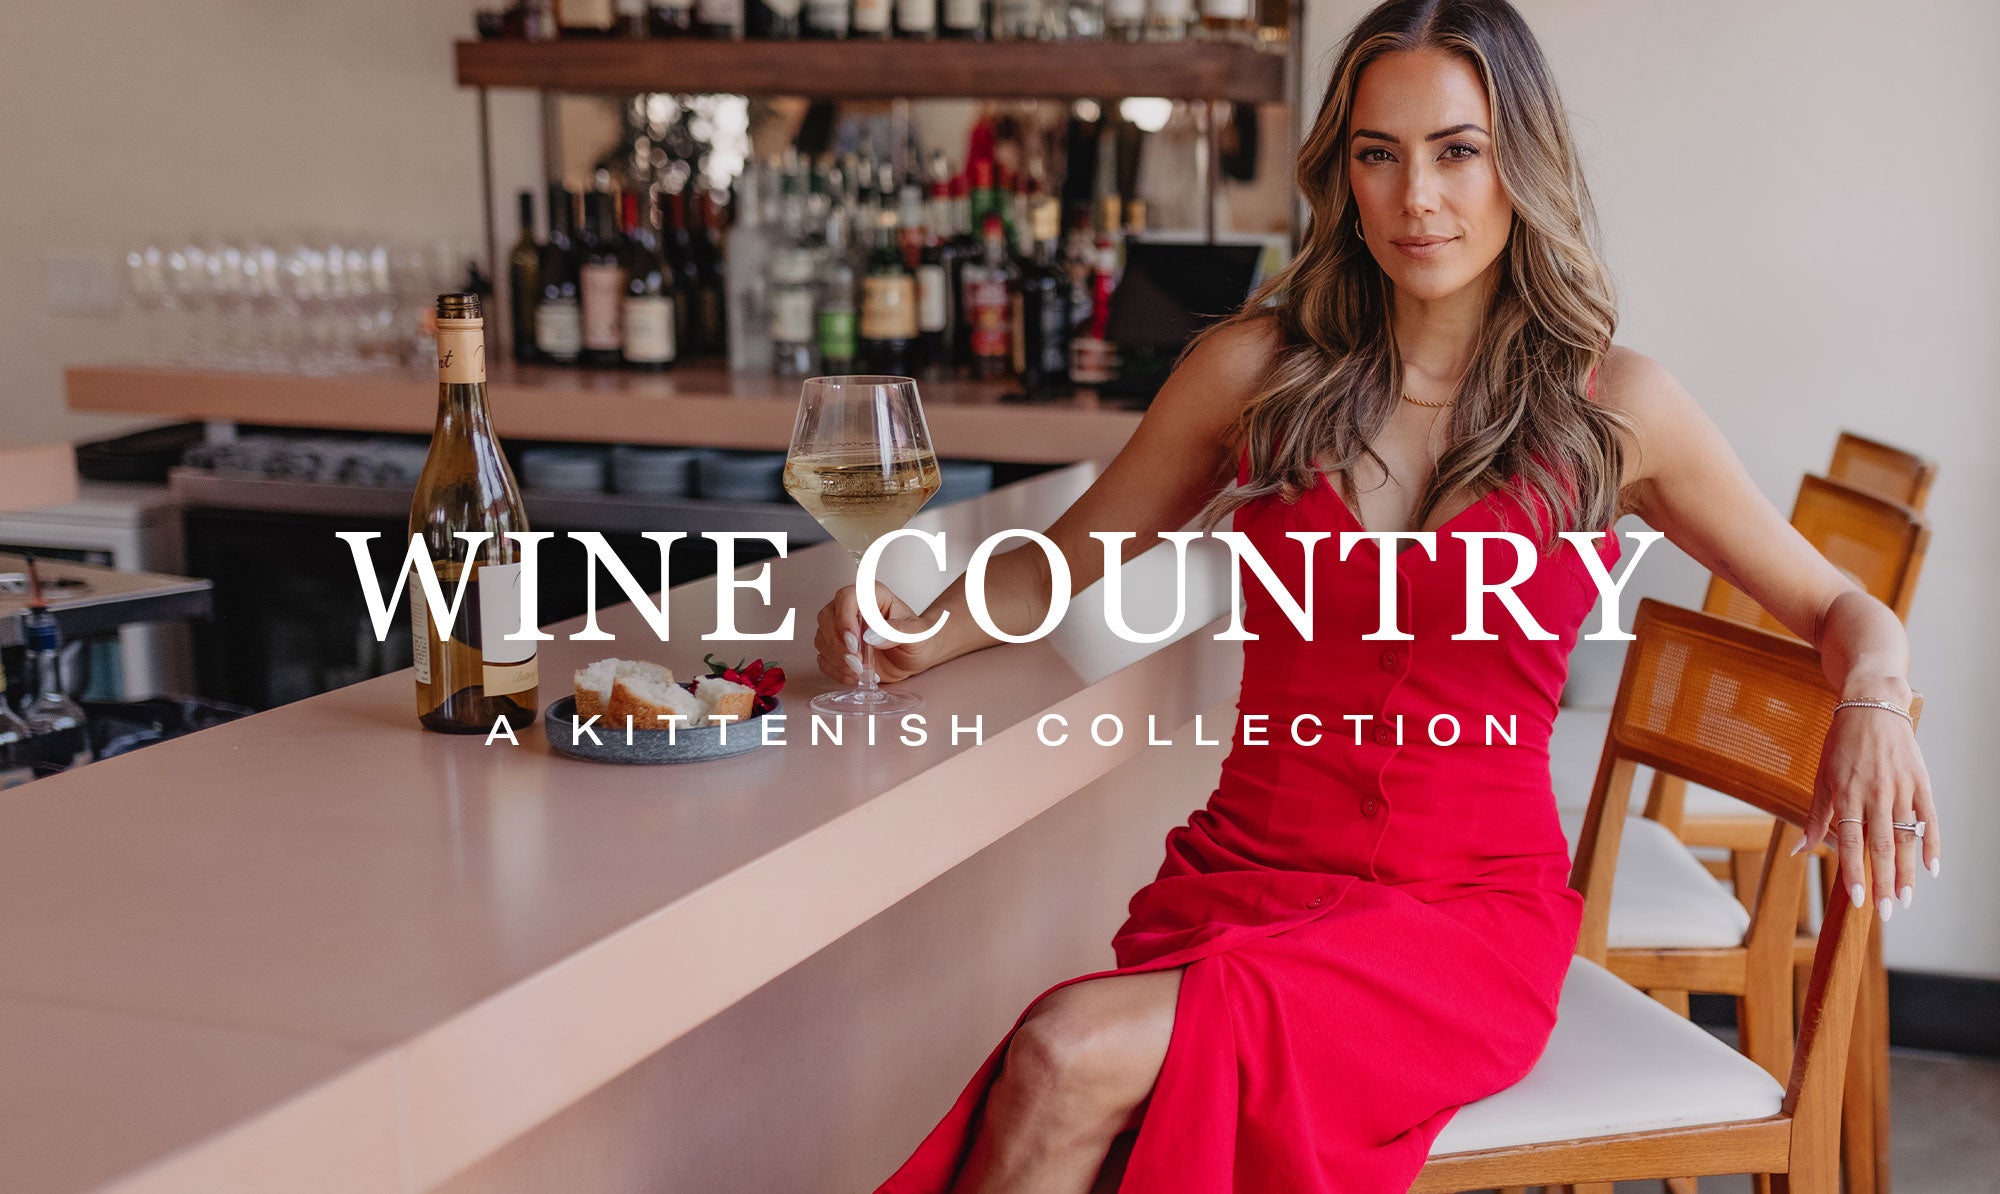 Wine Country: A Kittenish Collection